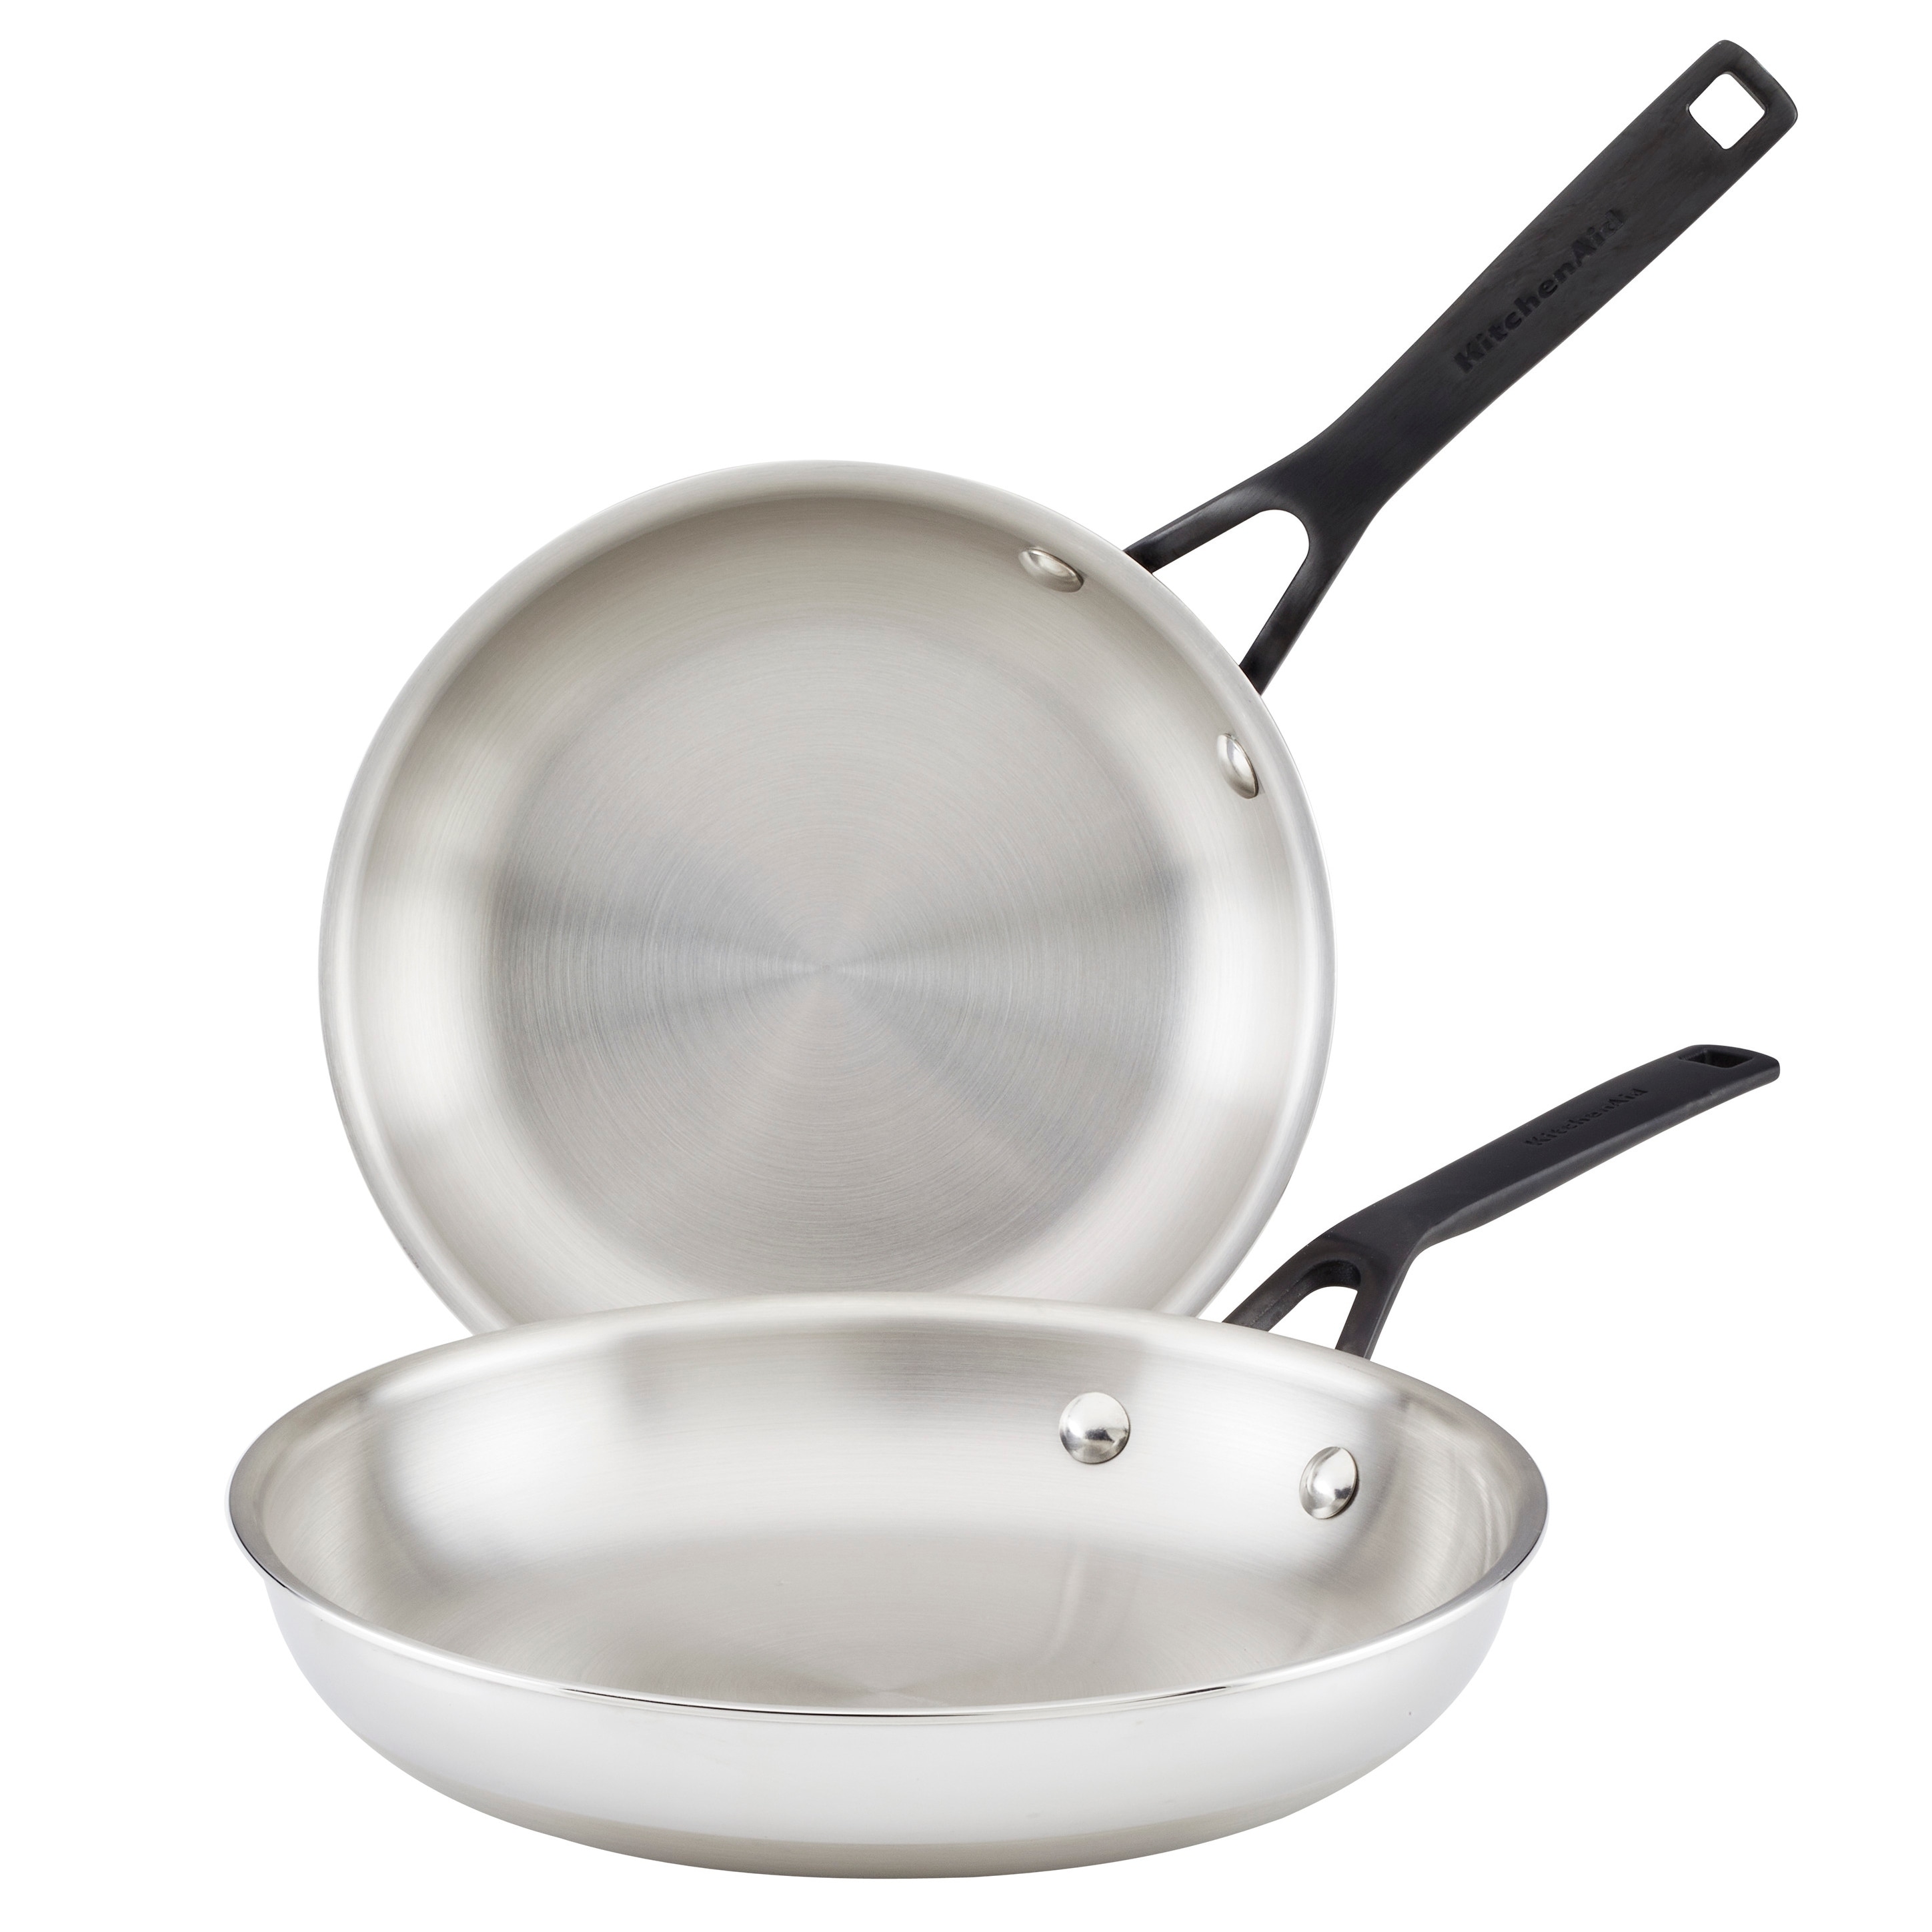 https://ak1.ostkcdn.com/images/products/is/images/direct/7368b41329bc8bf965e0c542850a7d53b3cbf833/KitchenAid-5-Ply-Clad-Stainless-Steel-Frying-Pan-Set%2C-2pc.jpg